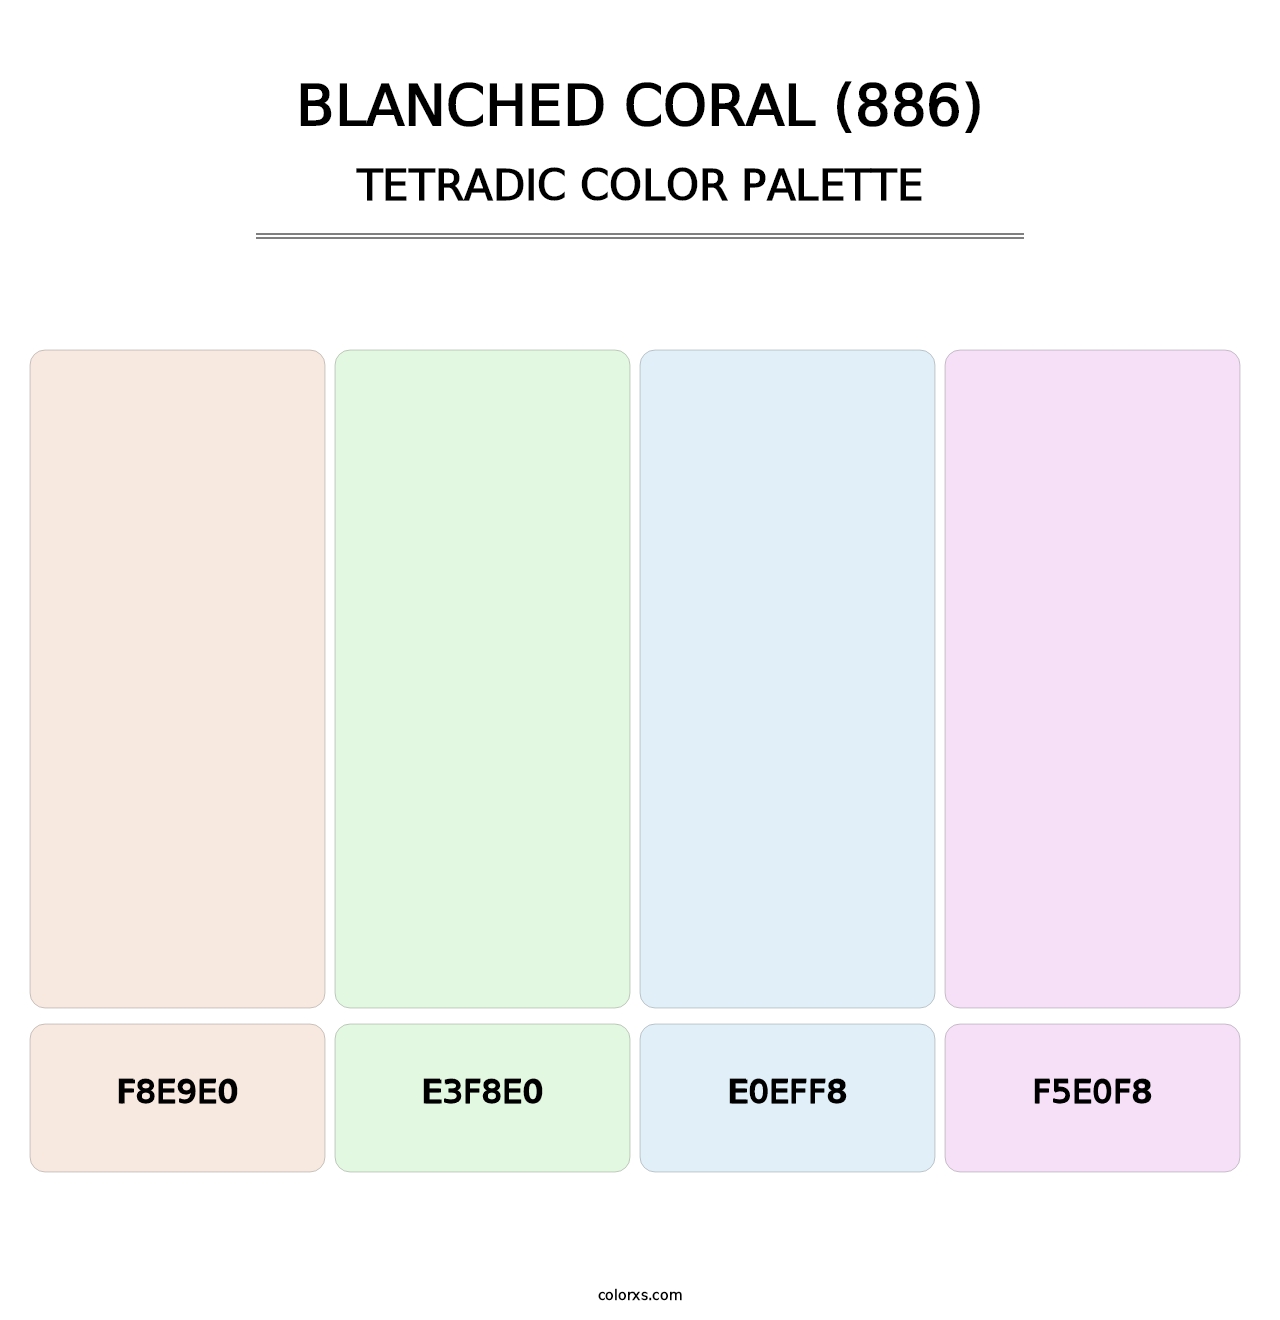 Blanched Coral (886) - Tetradic Color Palette